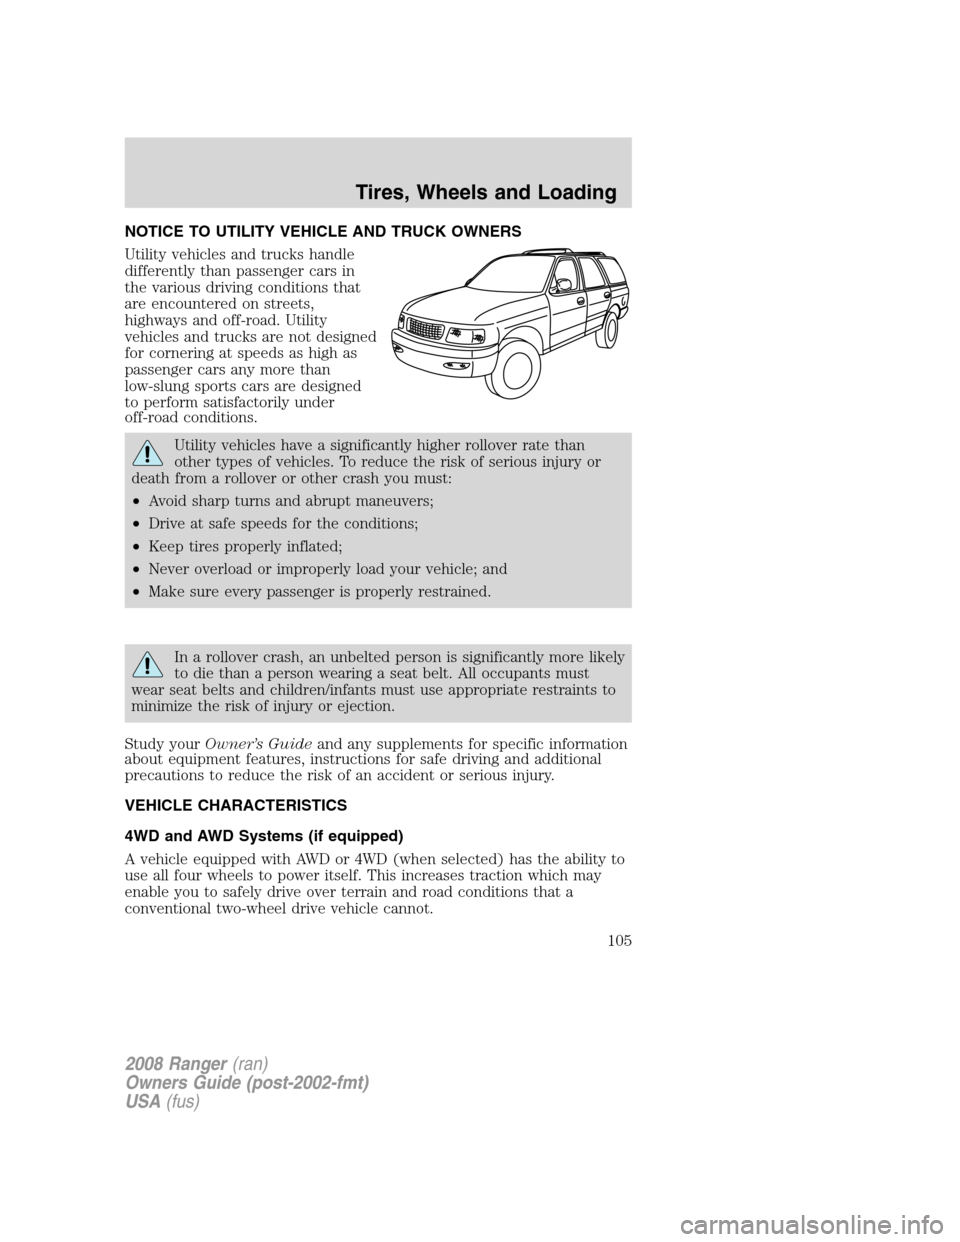 FORD RANGER 2008 2.G Owners Manual NOTICE TO UTILITY VEHICLE AND TRUCK OWNERS
Utility vehicles and trucks handle
differently than passenger cars in
the various driving conditions that
are encountered on streets,
highways and off-road. 